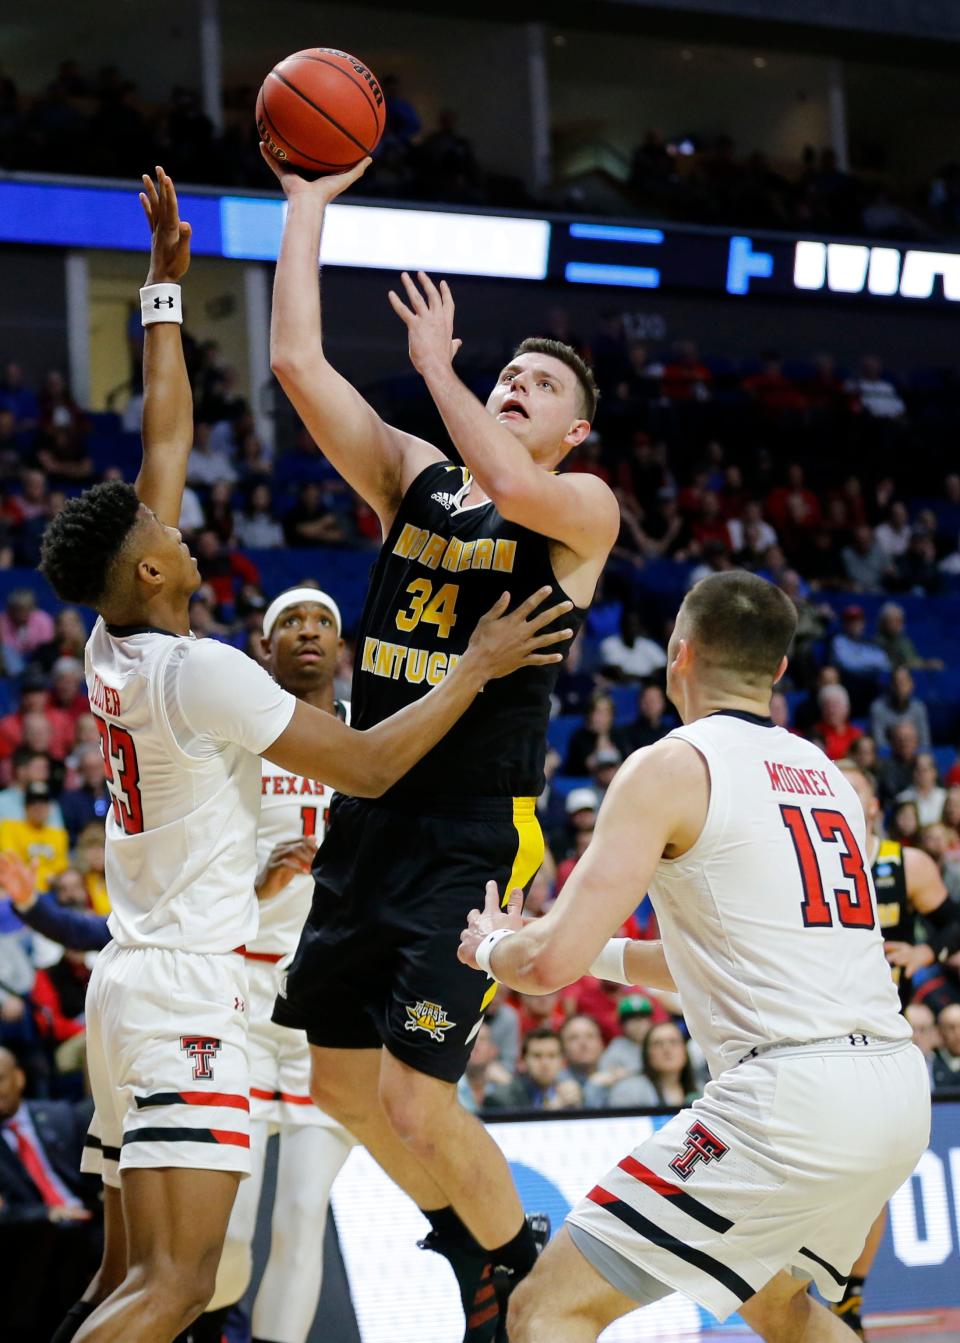 Northern Kentucky Norse forward Drew McDonald (34) attempts a shot in the first half of the NCAA Tournament First Round game between the 14-seeded Northern Kentucky Norse and the 3-seeded Texas Tech Red Raiders the BOK Center in downtown Tulsa on Friday, March 22, 2019. Texas Tech led 30-26 at halftime. 